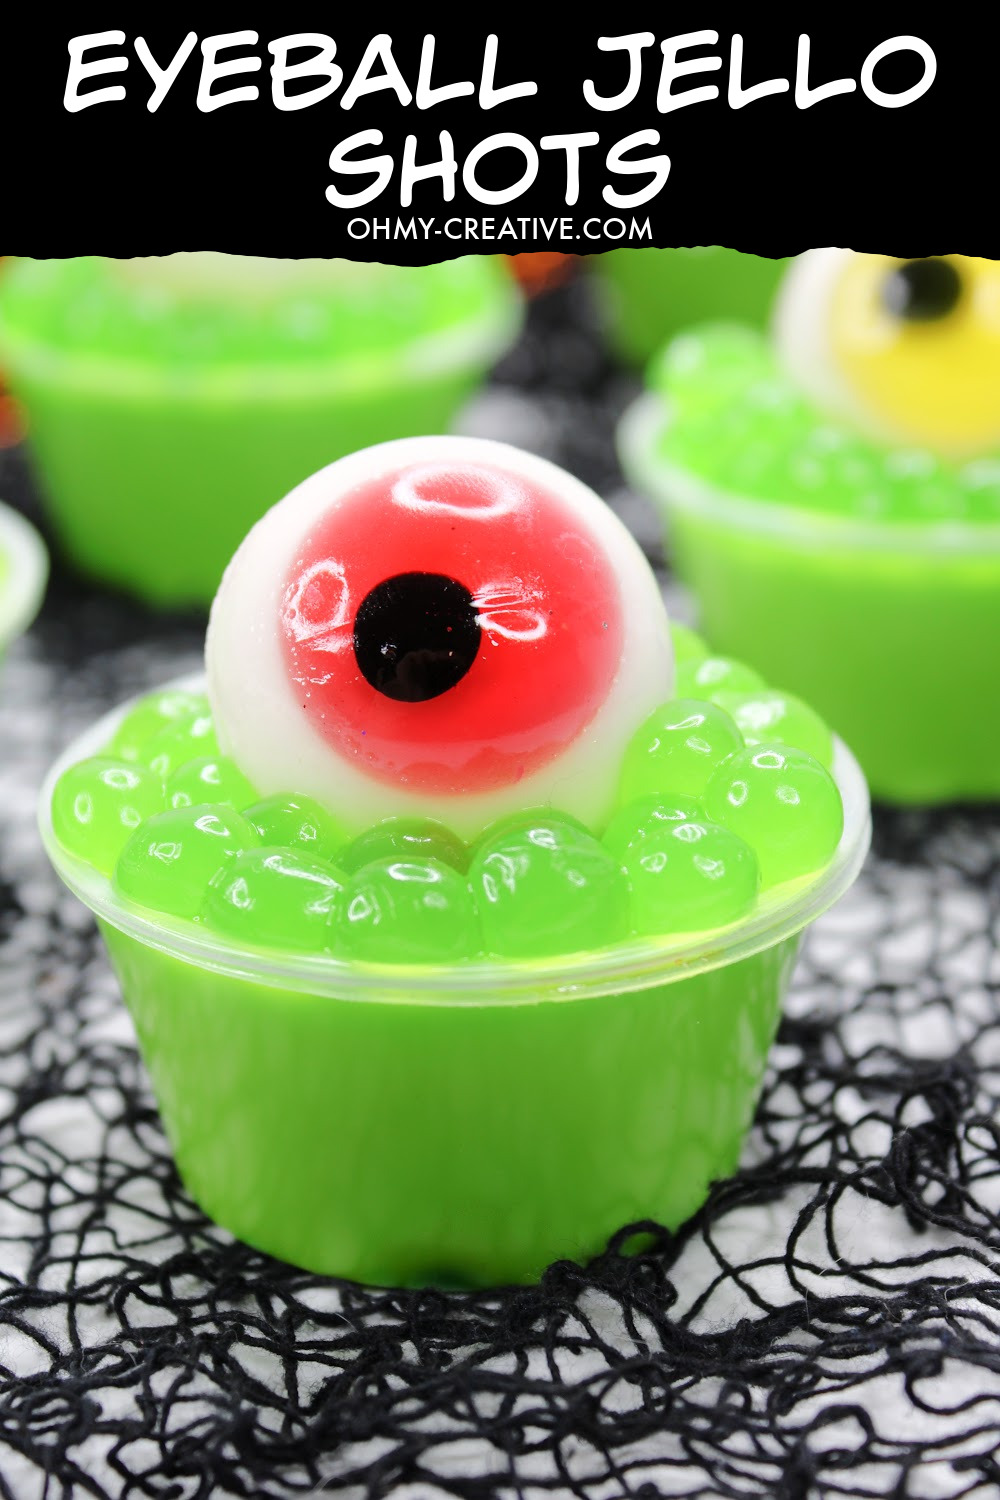 These Halloween Eyeball Jello Shots are topped with green boba and a gummy eyeball with red iris perfect for Halloween! Several of them are sitting on a black spiderweb background.